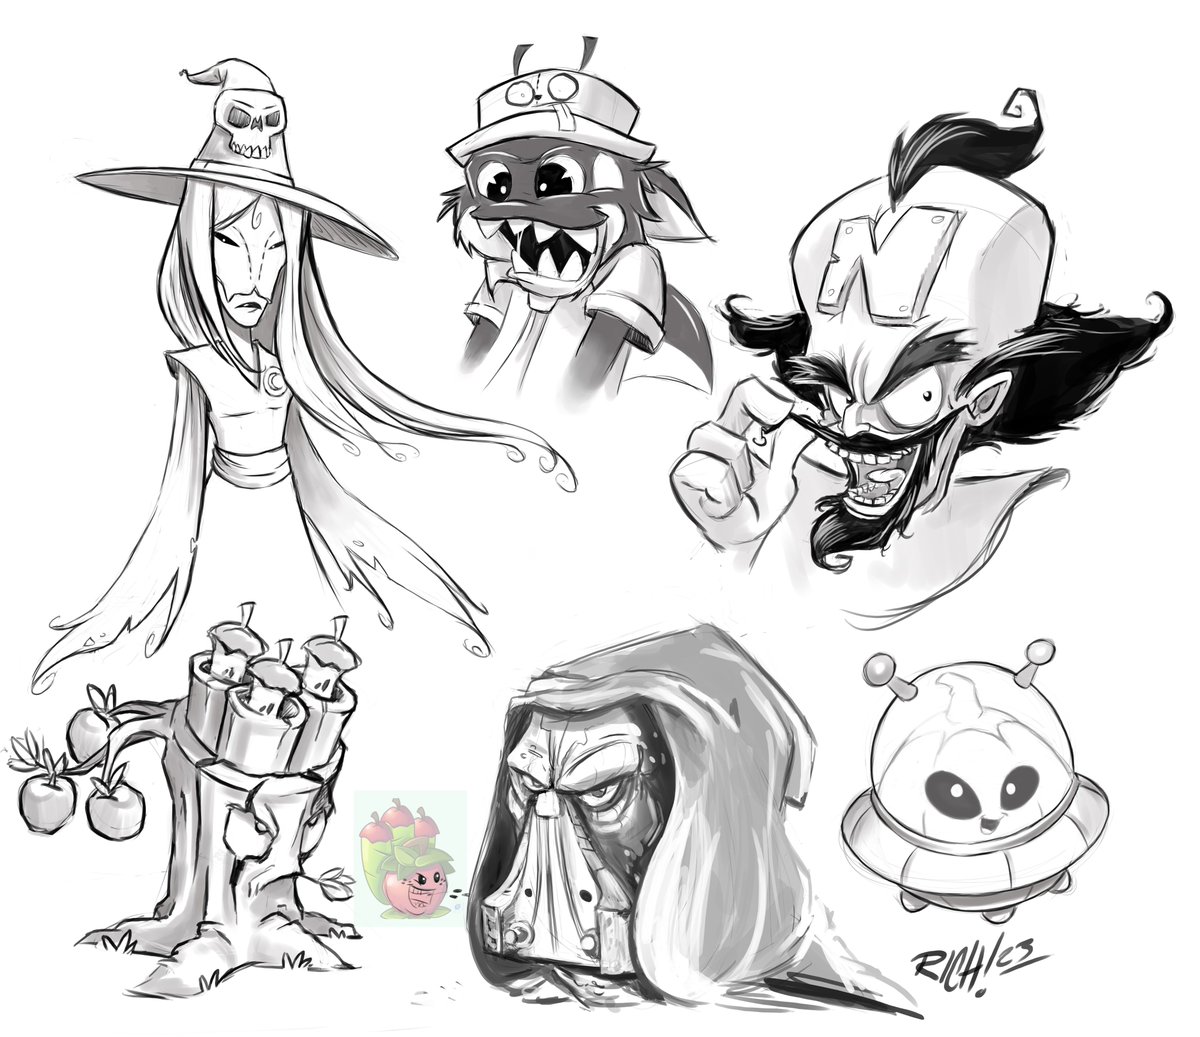 I maked some arts LIVE! We have my daughters OC Witch, Another OC 'Orca/Cat', Dr Neo Cortex from Crash Bandicoot, Apple Mortar with NO ref, PVZ 2. Darth Malgus from Star Wars. (I don't do realistic fast) and Saucer from PVZ China. #PVZ #CrashBandicoot #StarWars #pvz2fanart